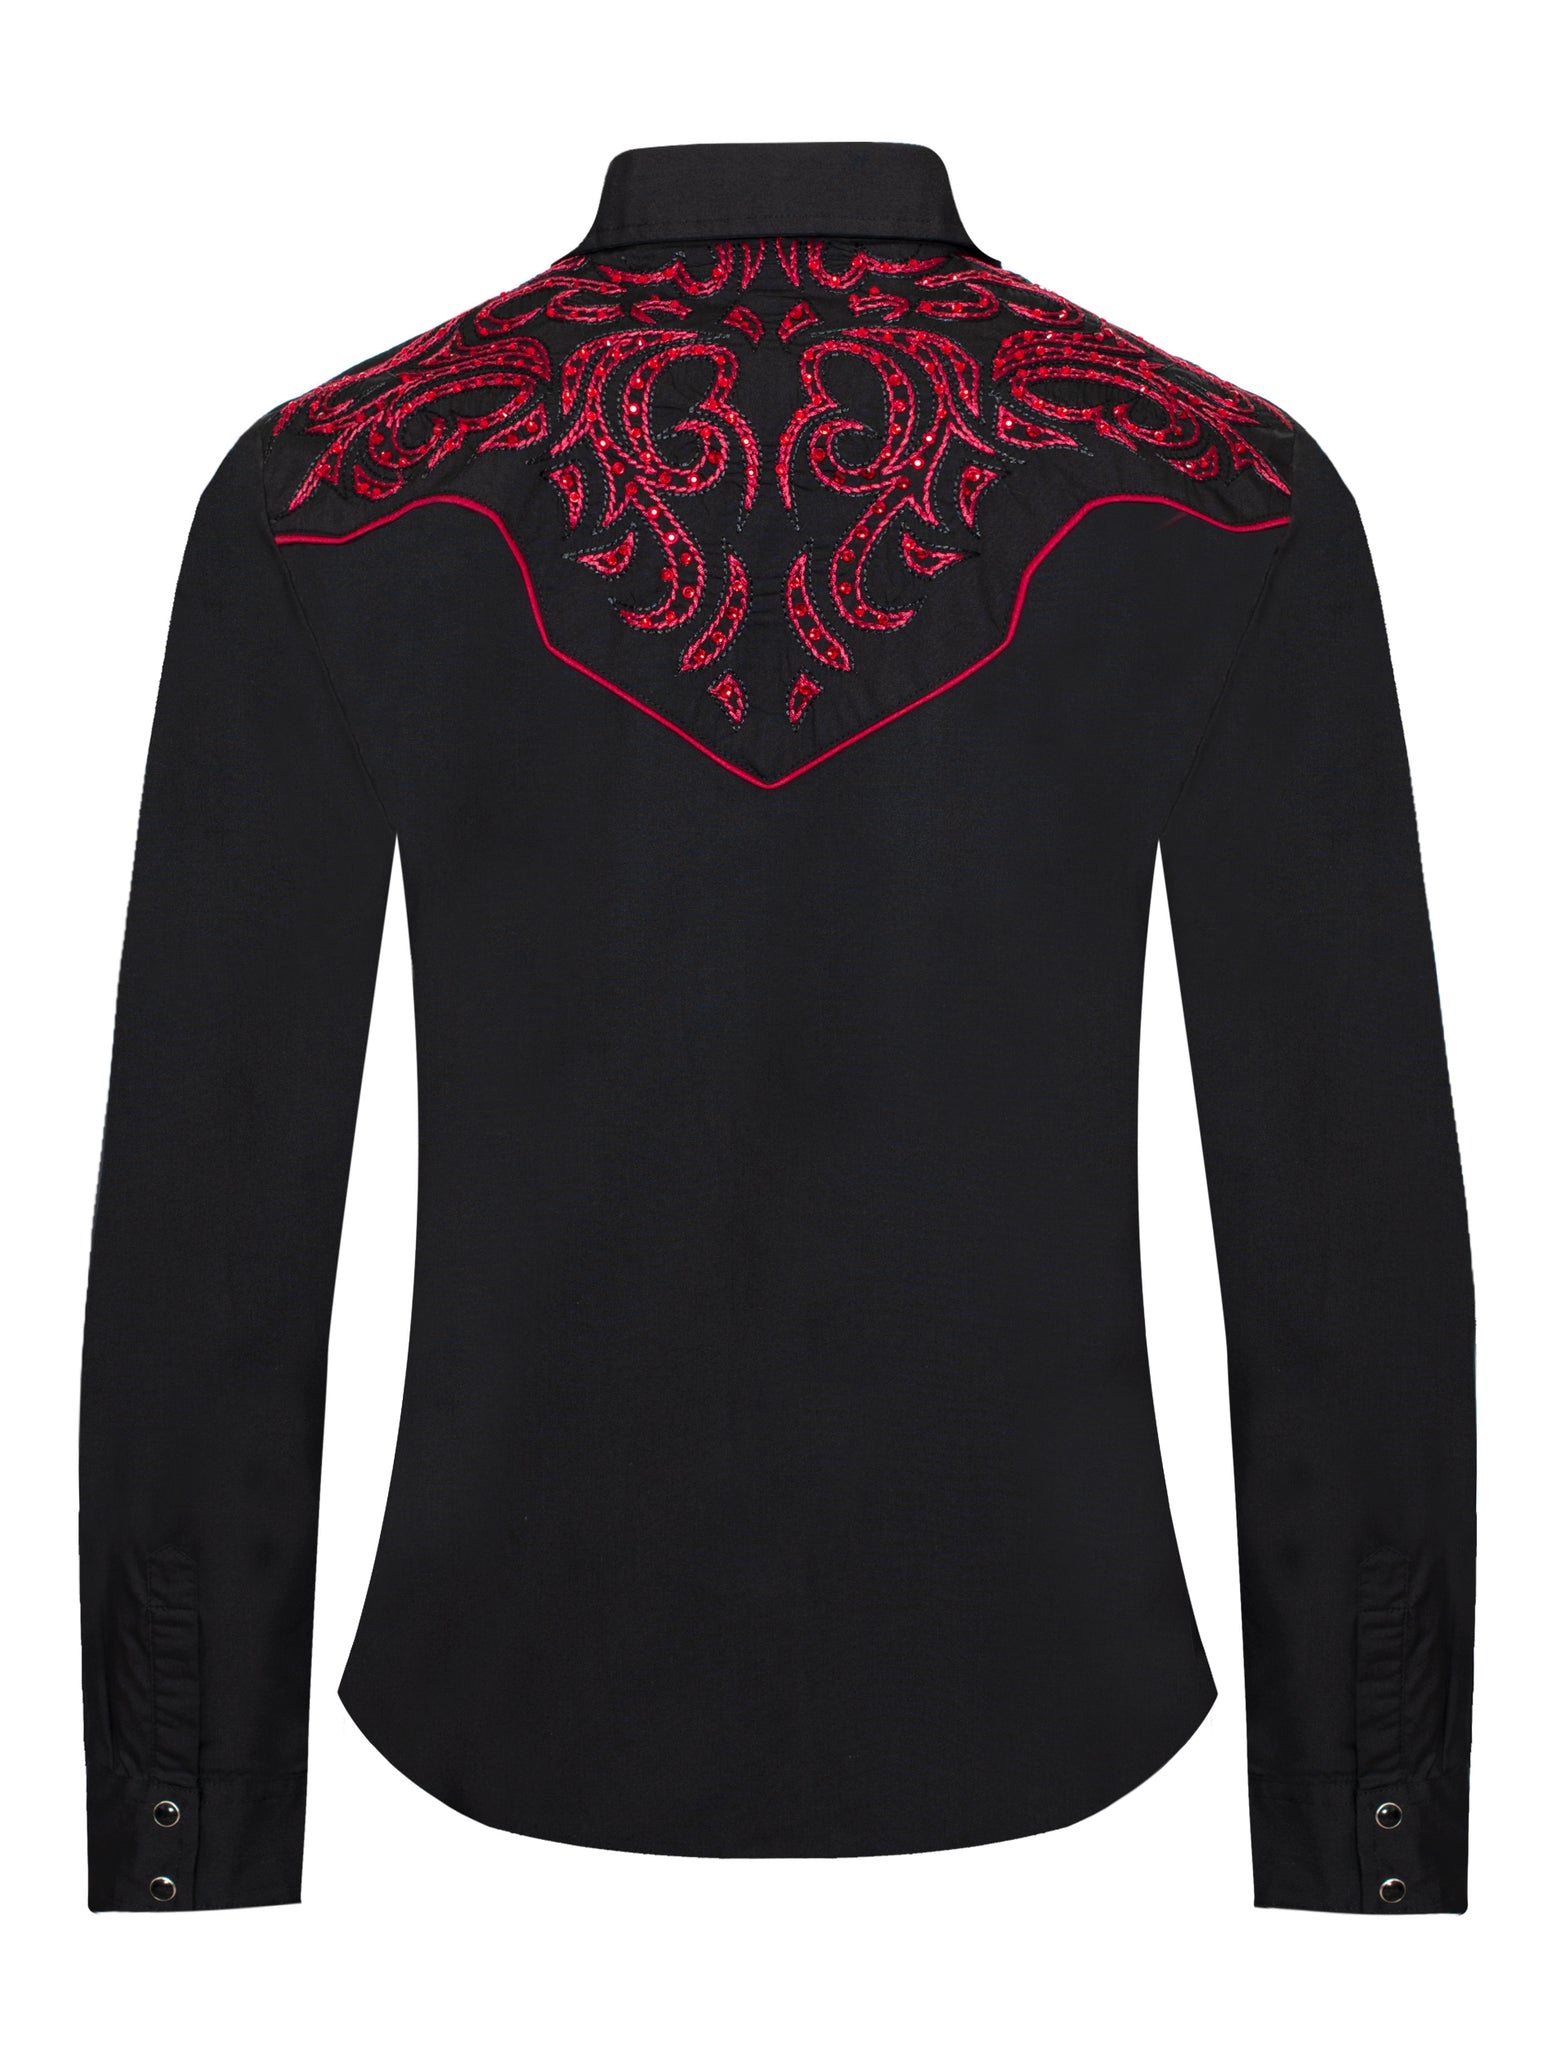 Women’s Western Embroidered diamond studded Shirts-LS500D-528